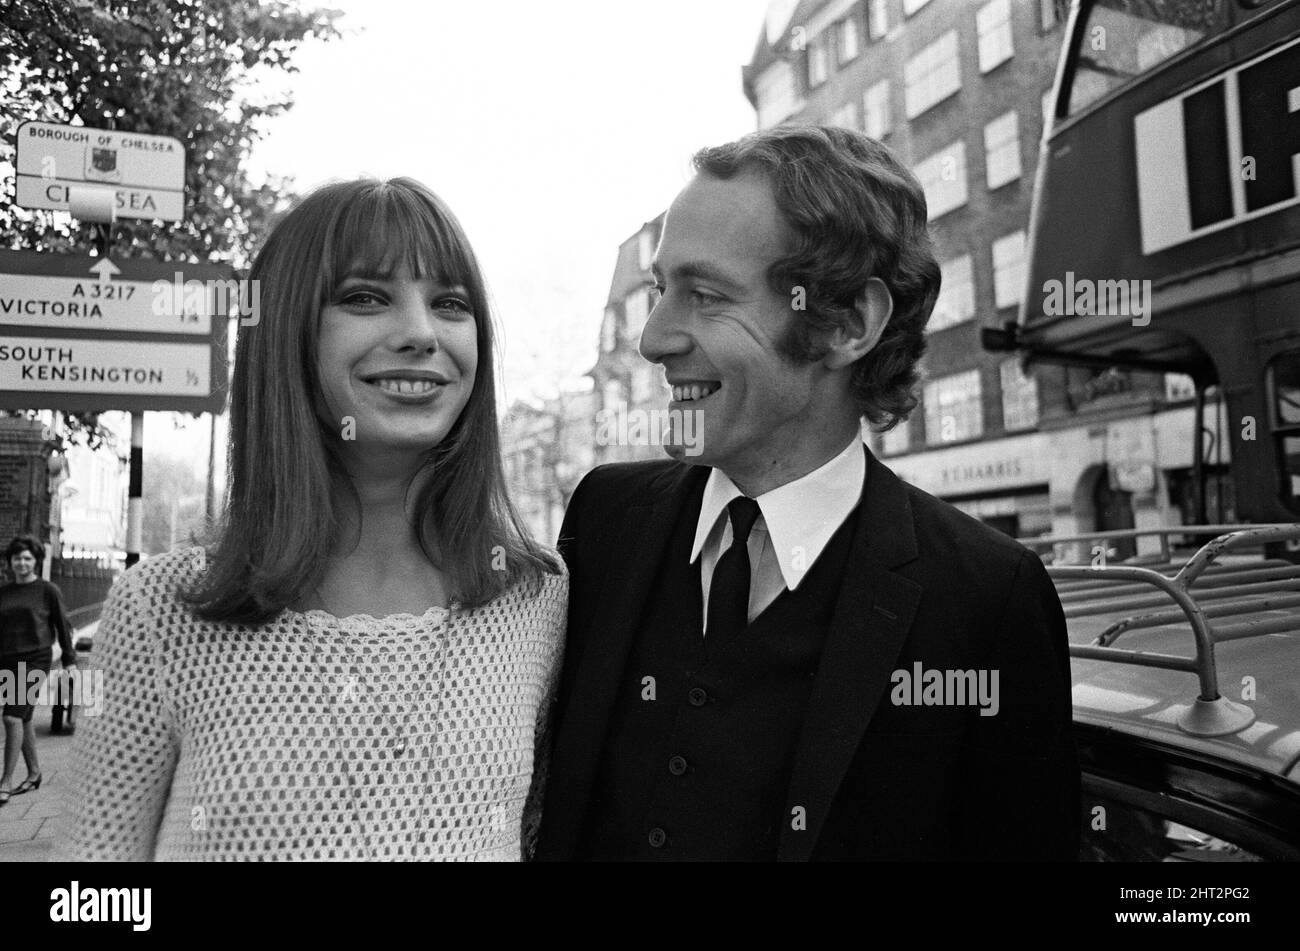 18-year-old Jane Birkin, currently starring in the lead role of 'Passion Flower Hotel' marries in secret at Chelsea Registry Office London to John Barry, aged 30. 16th October 1965. Stock Photo